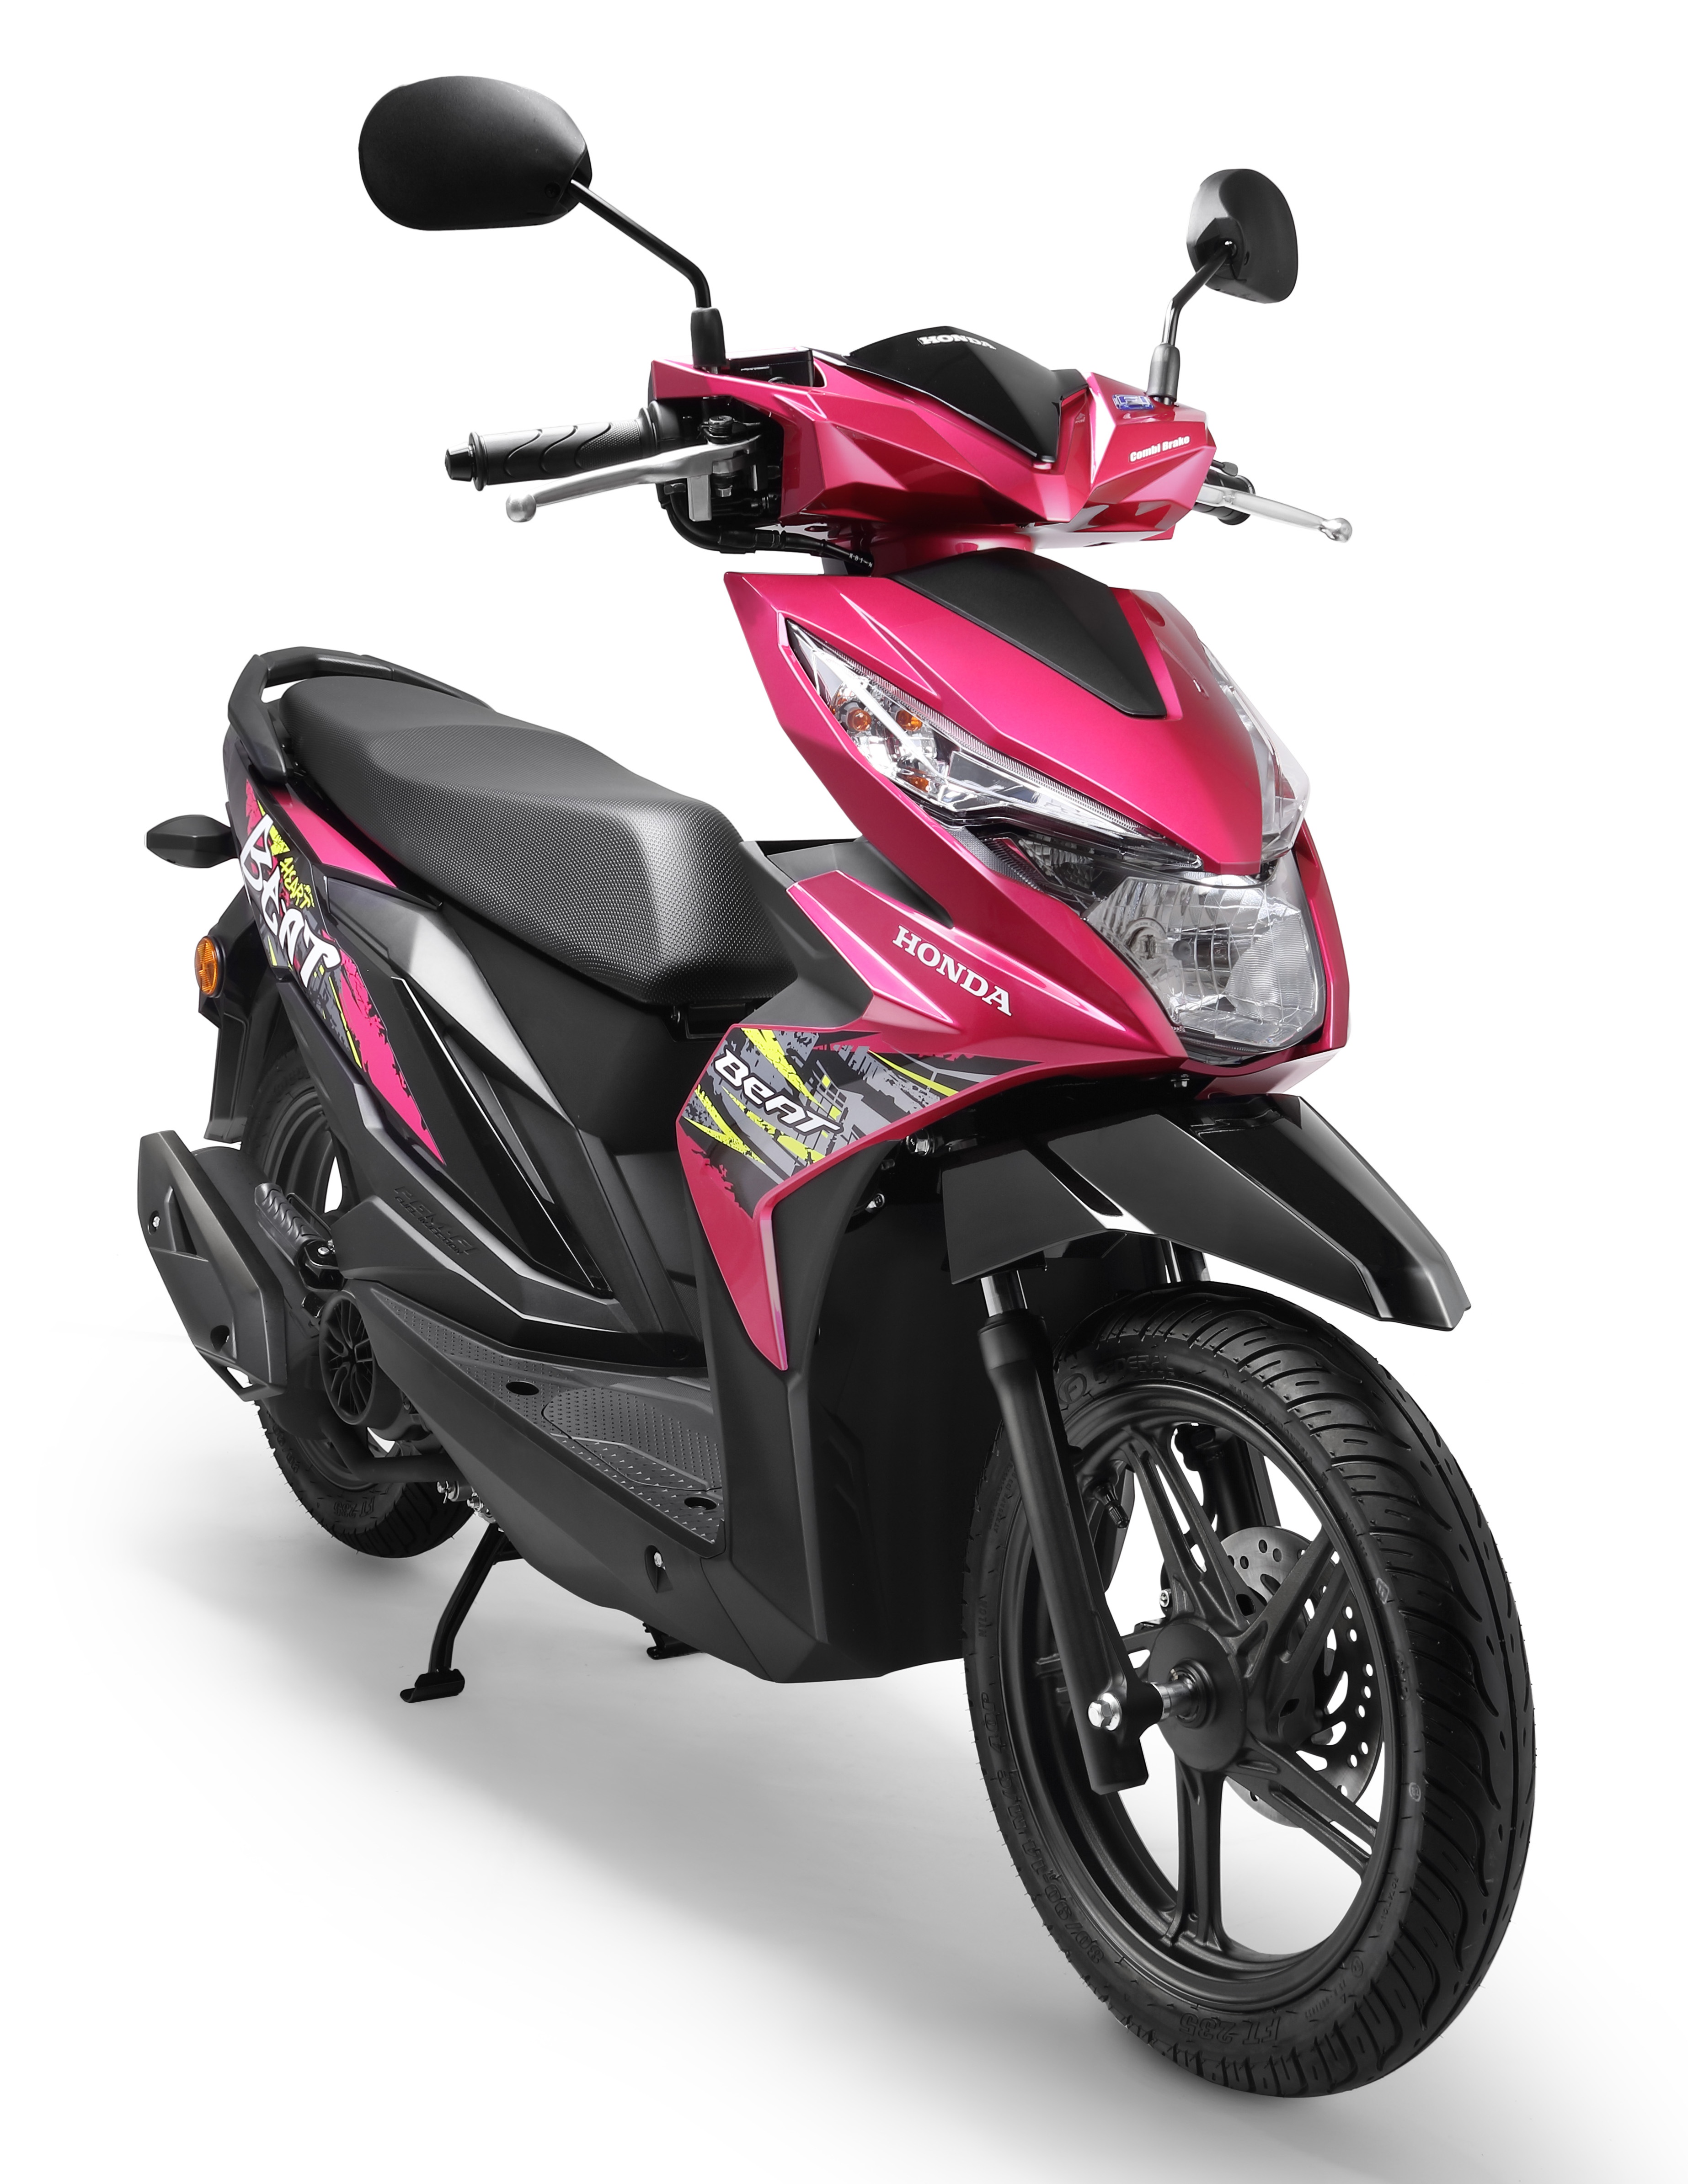 2018 Honda BeAT scooter now on sale - RM5,724 Paul Tan - Image 739949